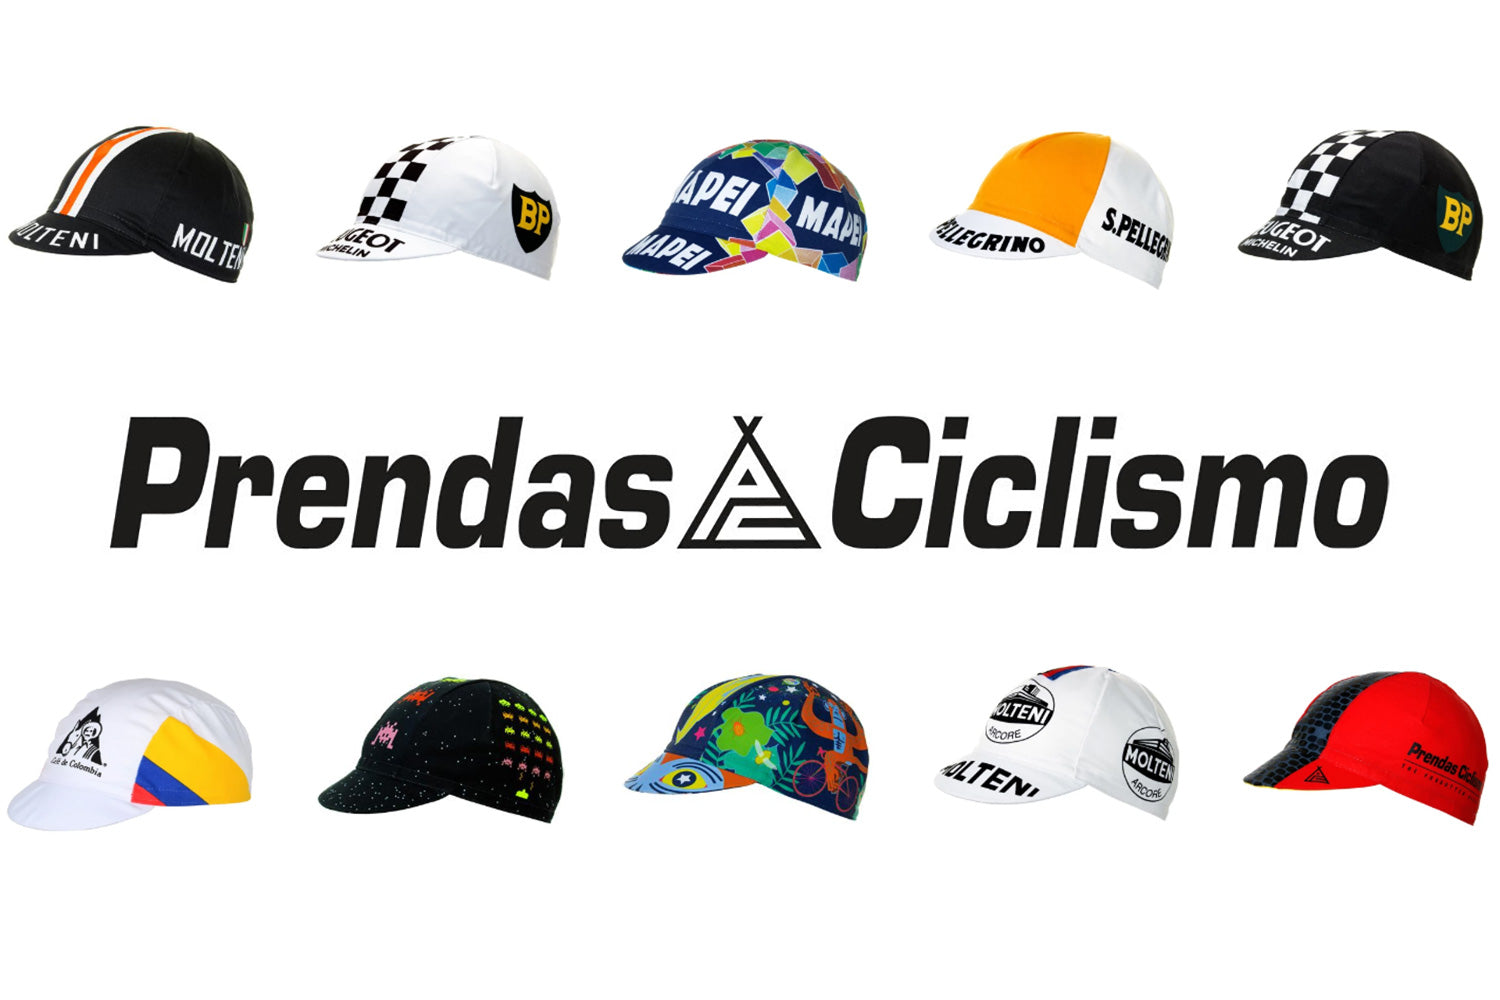 What are our best cycling caps in 2019?